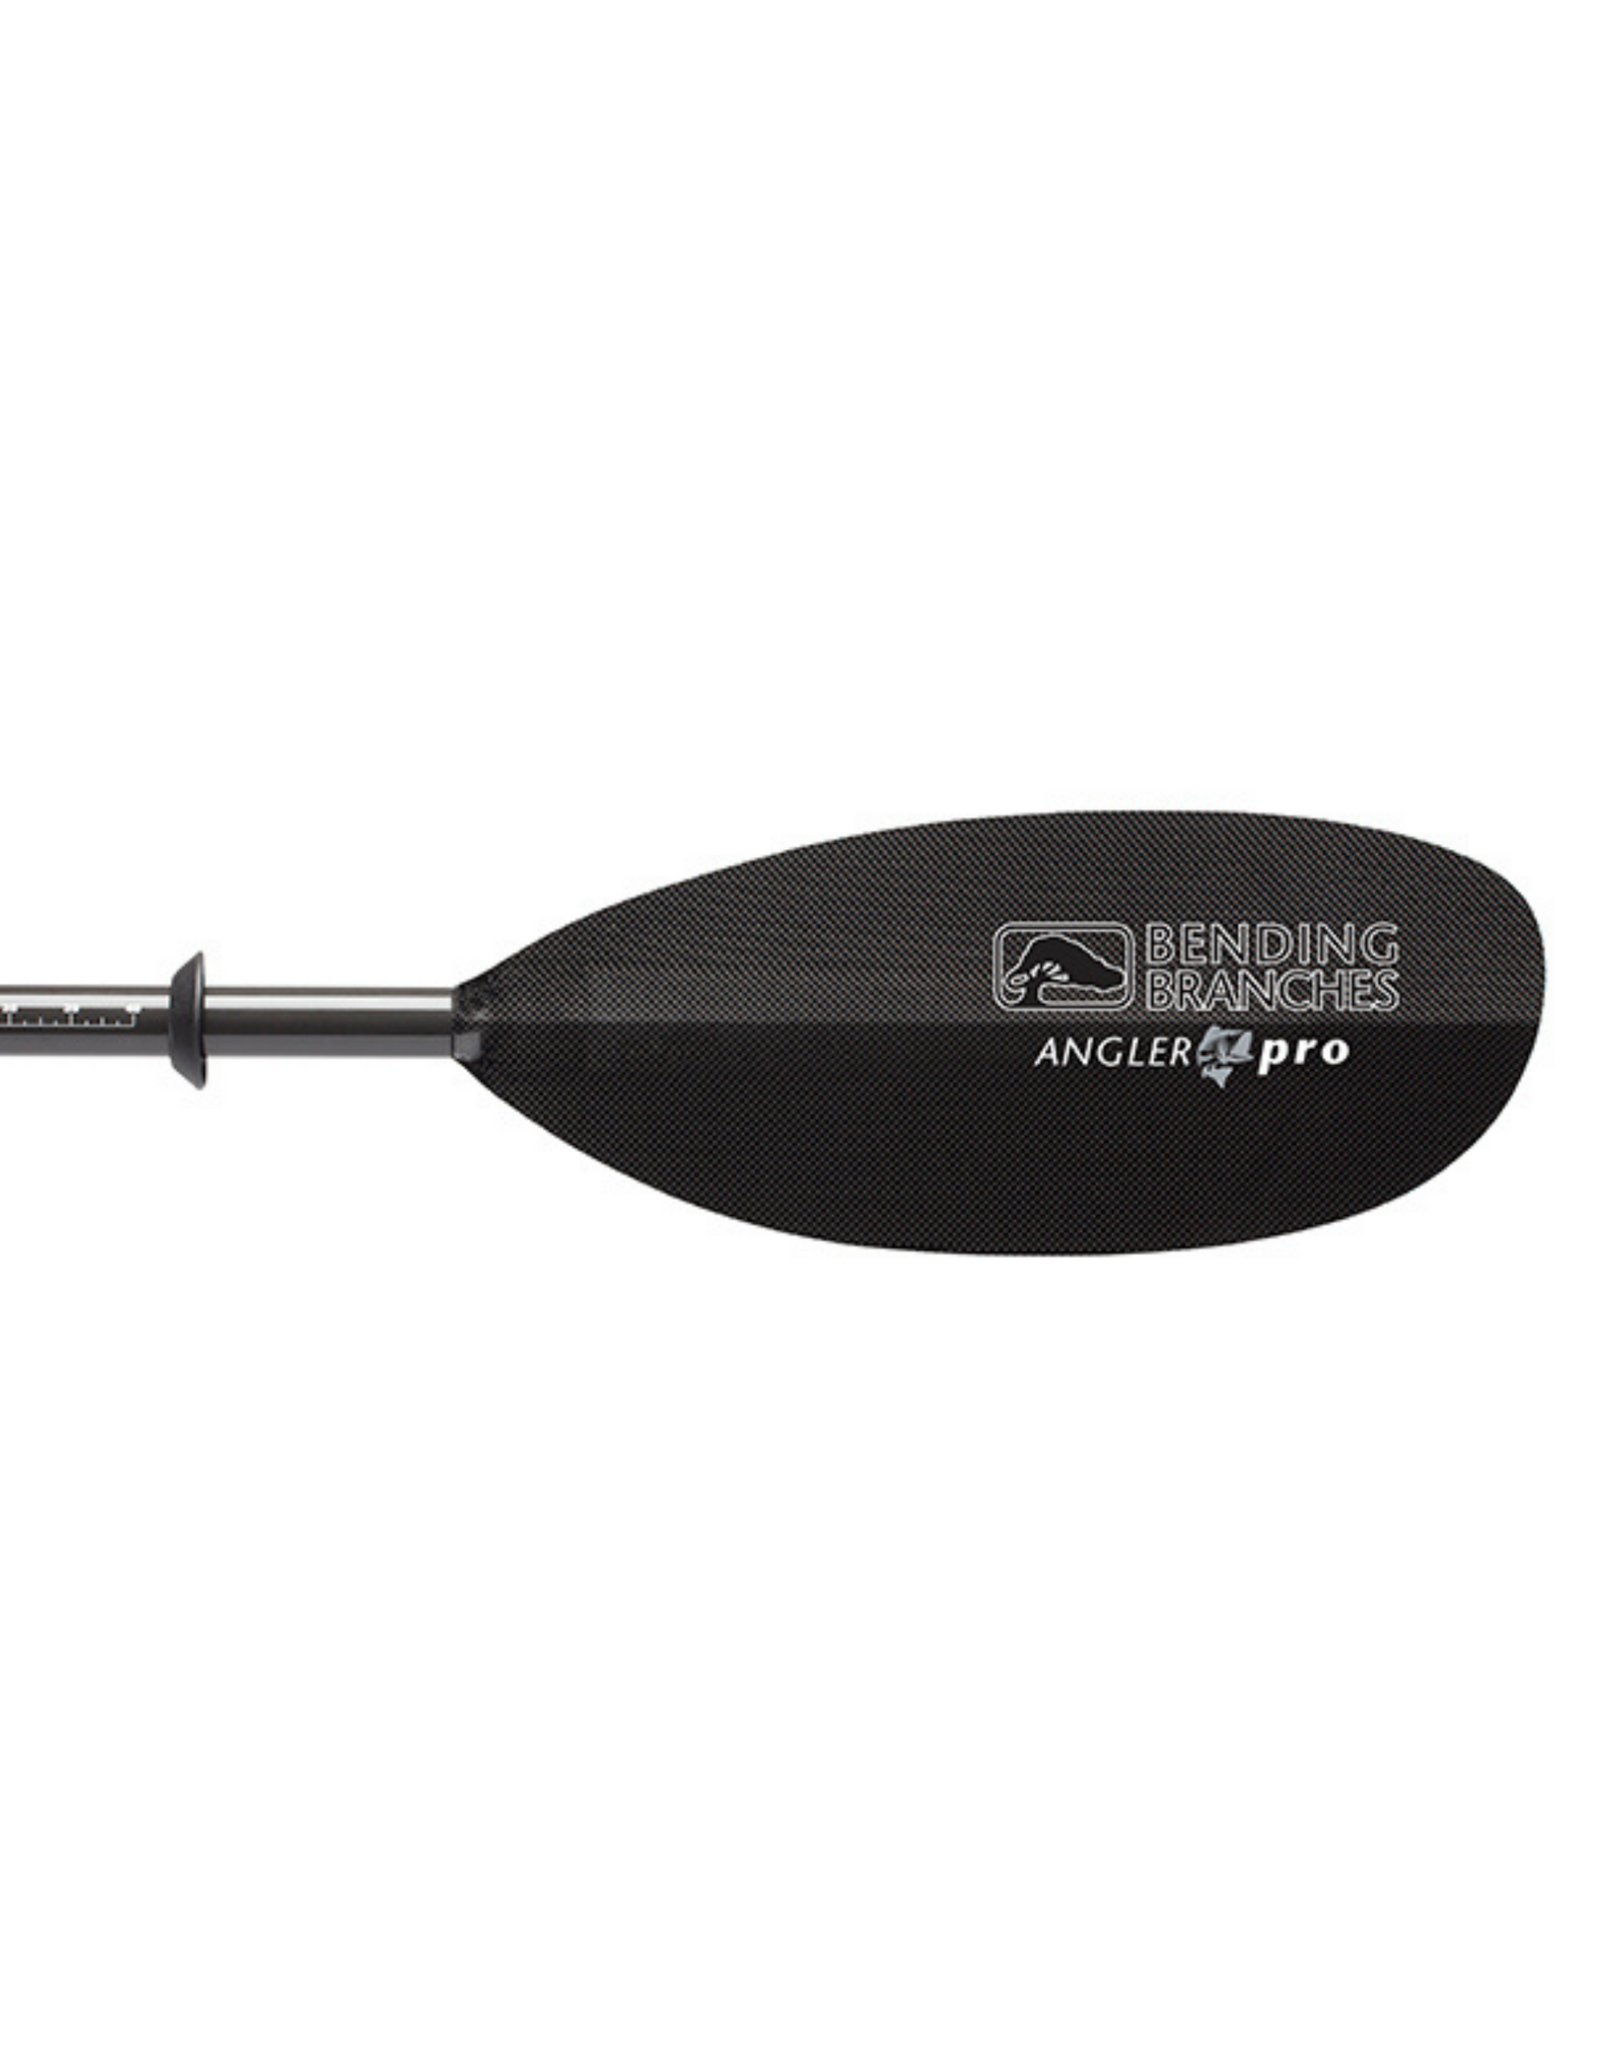 Bending Branches Bending Branches paddle Angler Pro Carbon